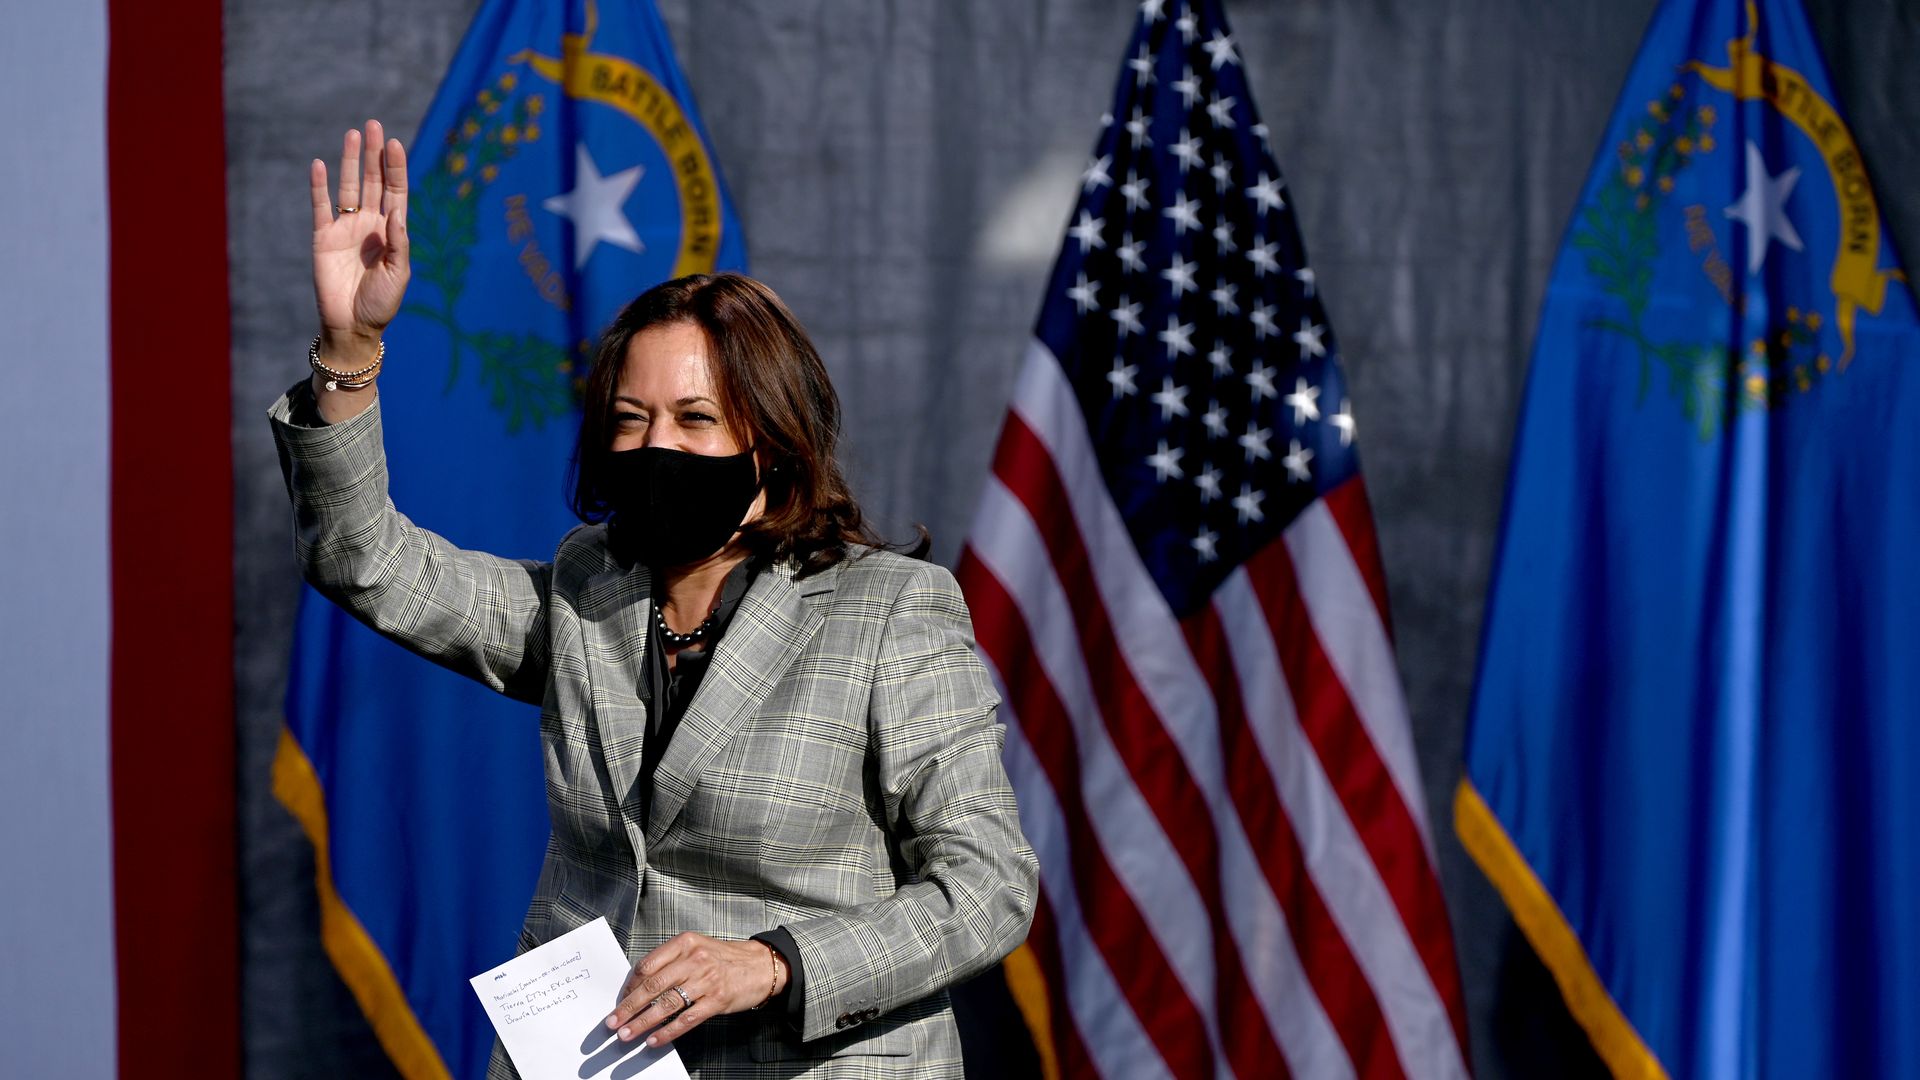 Senator Harris in front of a flag